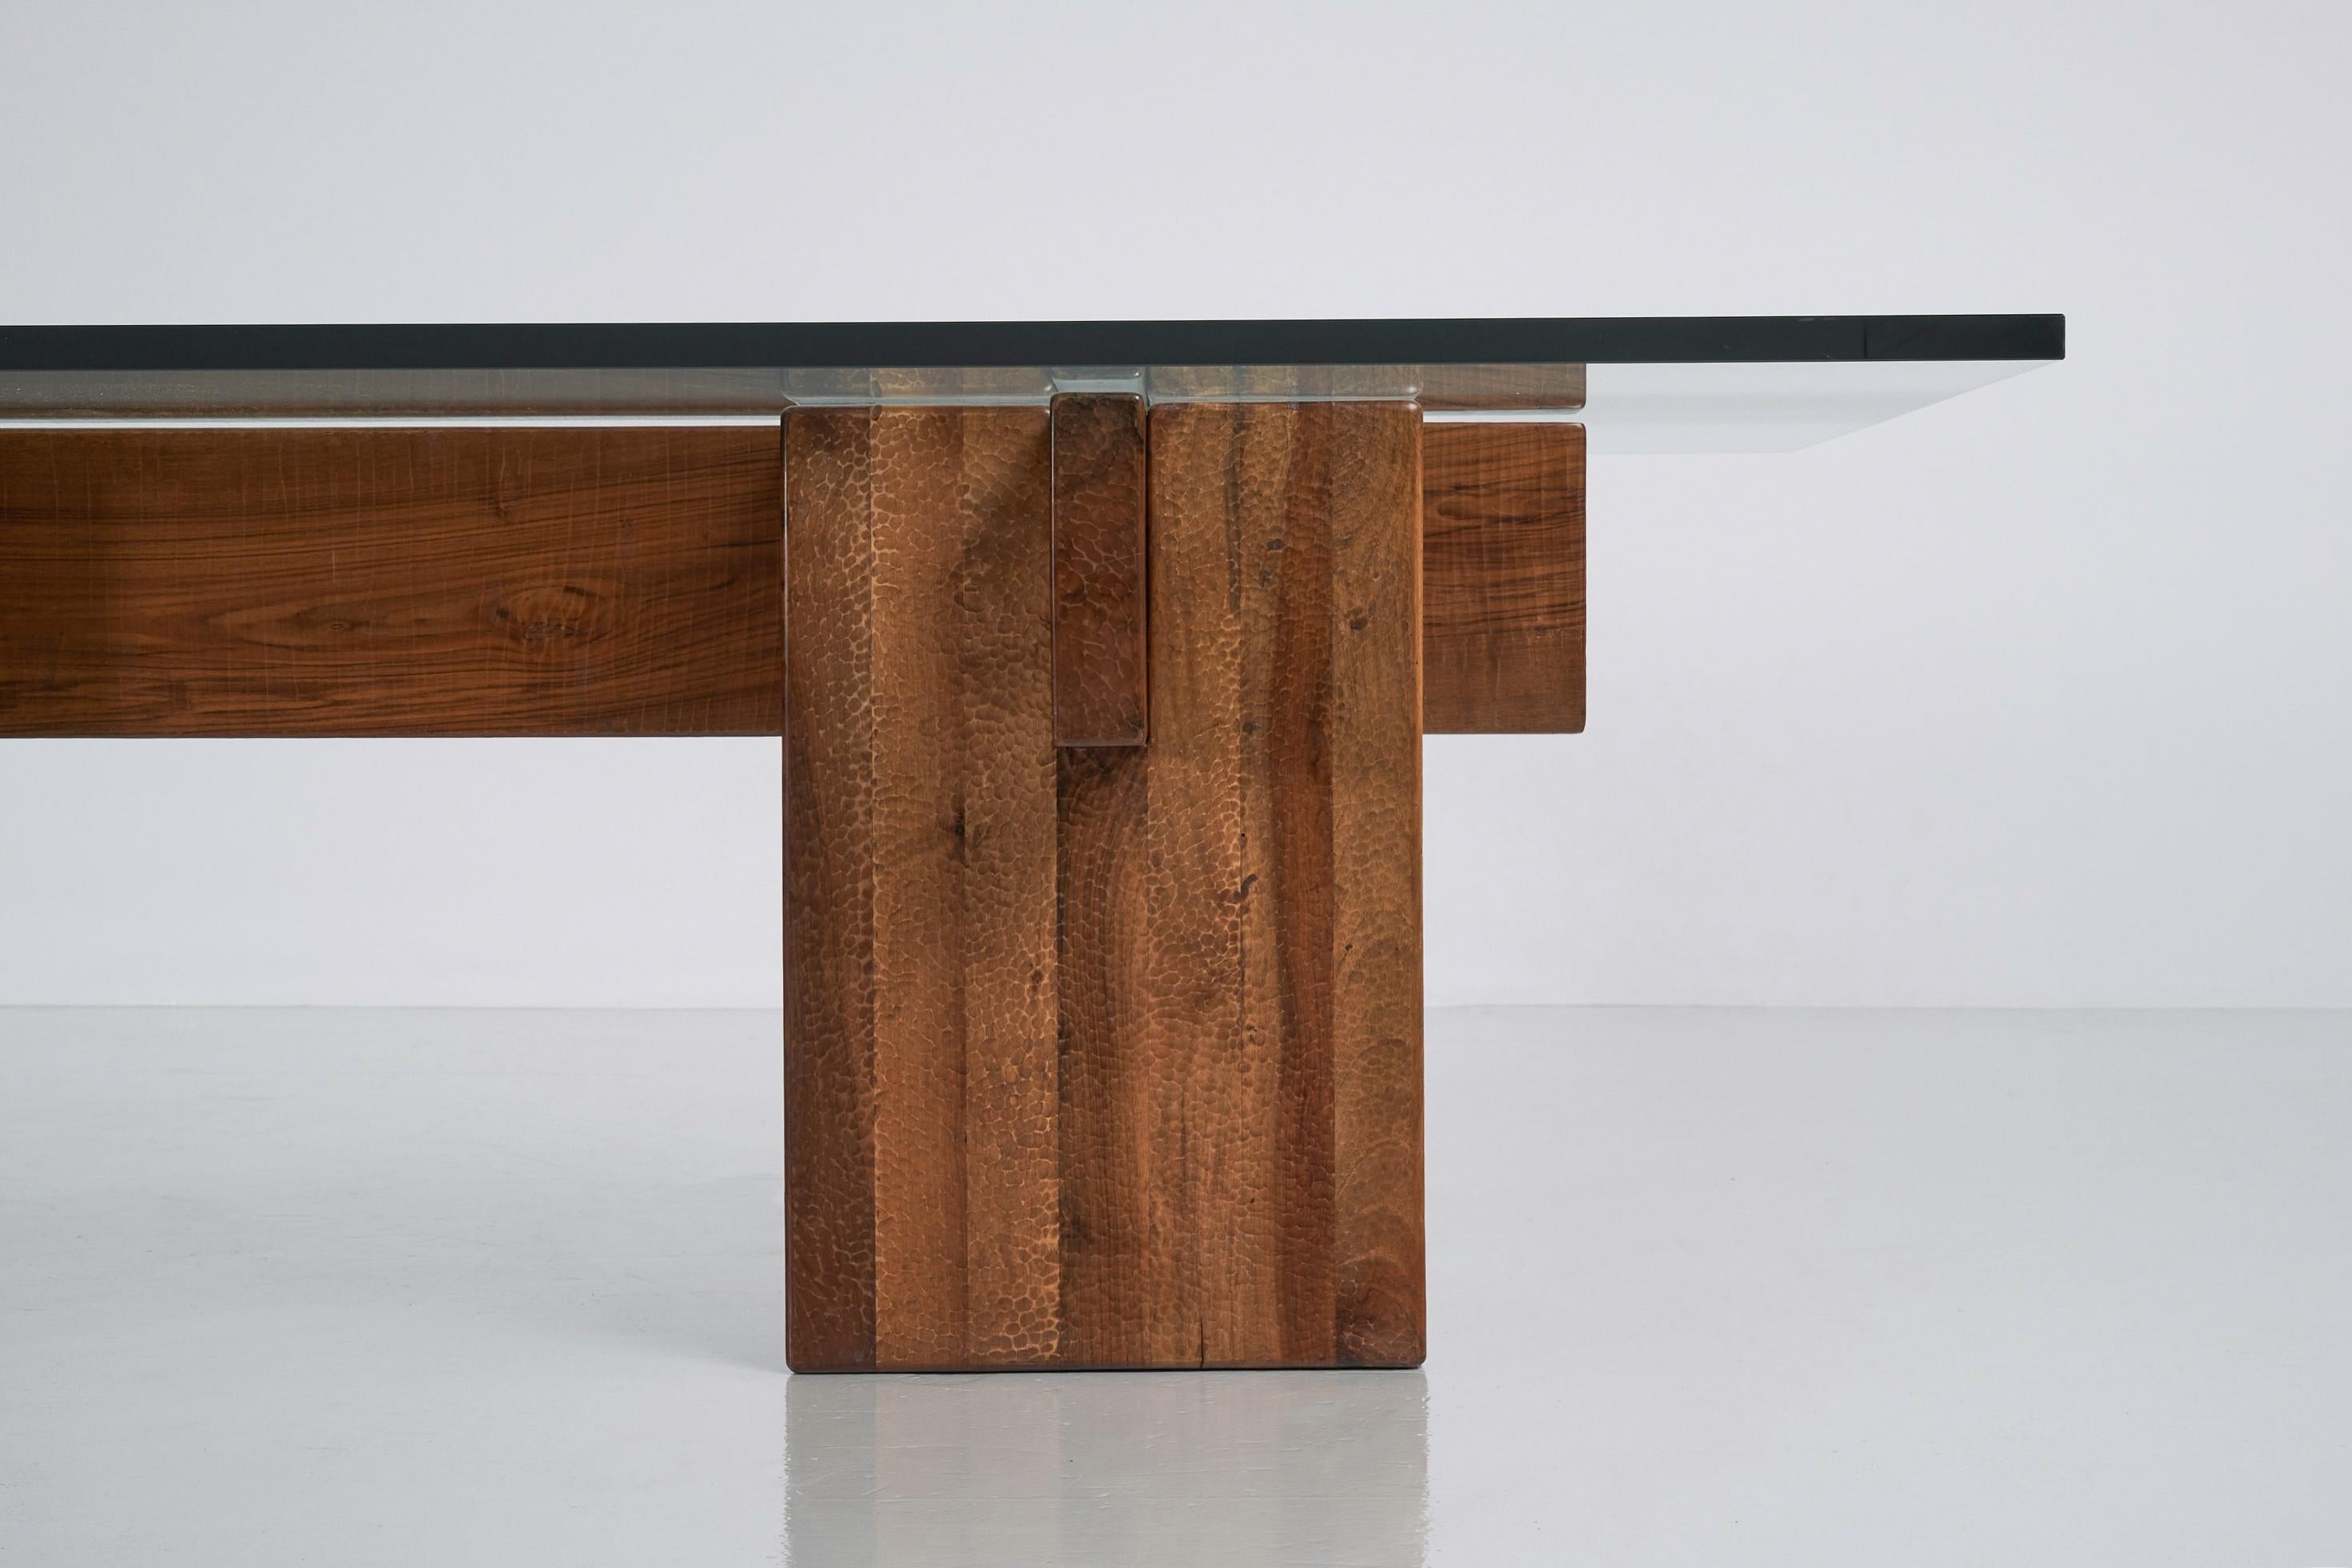 An amazing and exceptional Brutalist shaped dining table by the Italian sculptor and designed Giuseppe Rivadossi, manufactured in his own workshop; officina Rivadossi, in Italy 1979. This large and colossal dining table has an amazing high level of